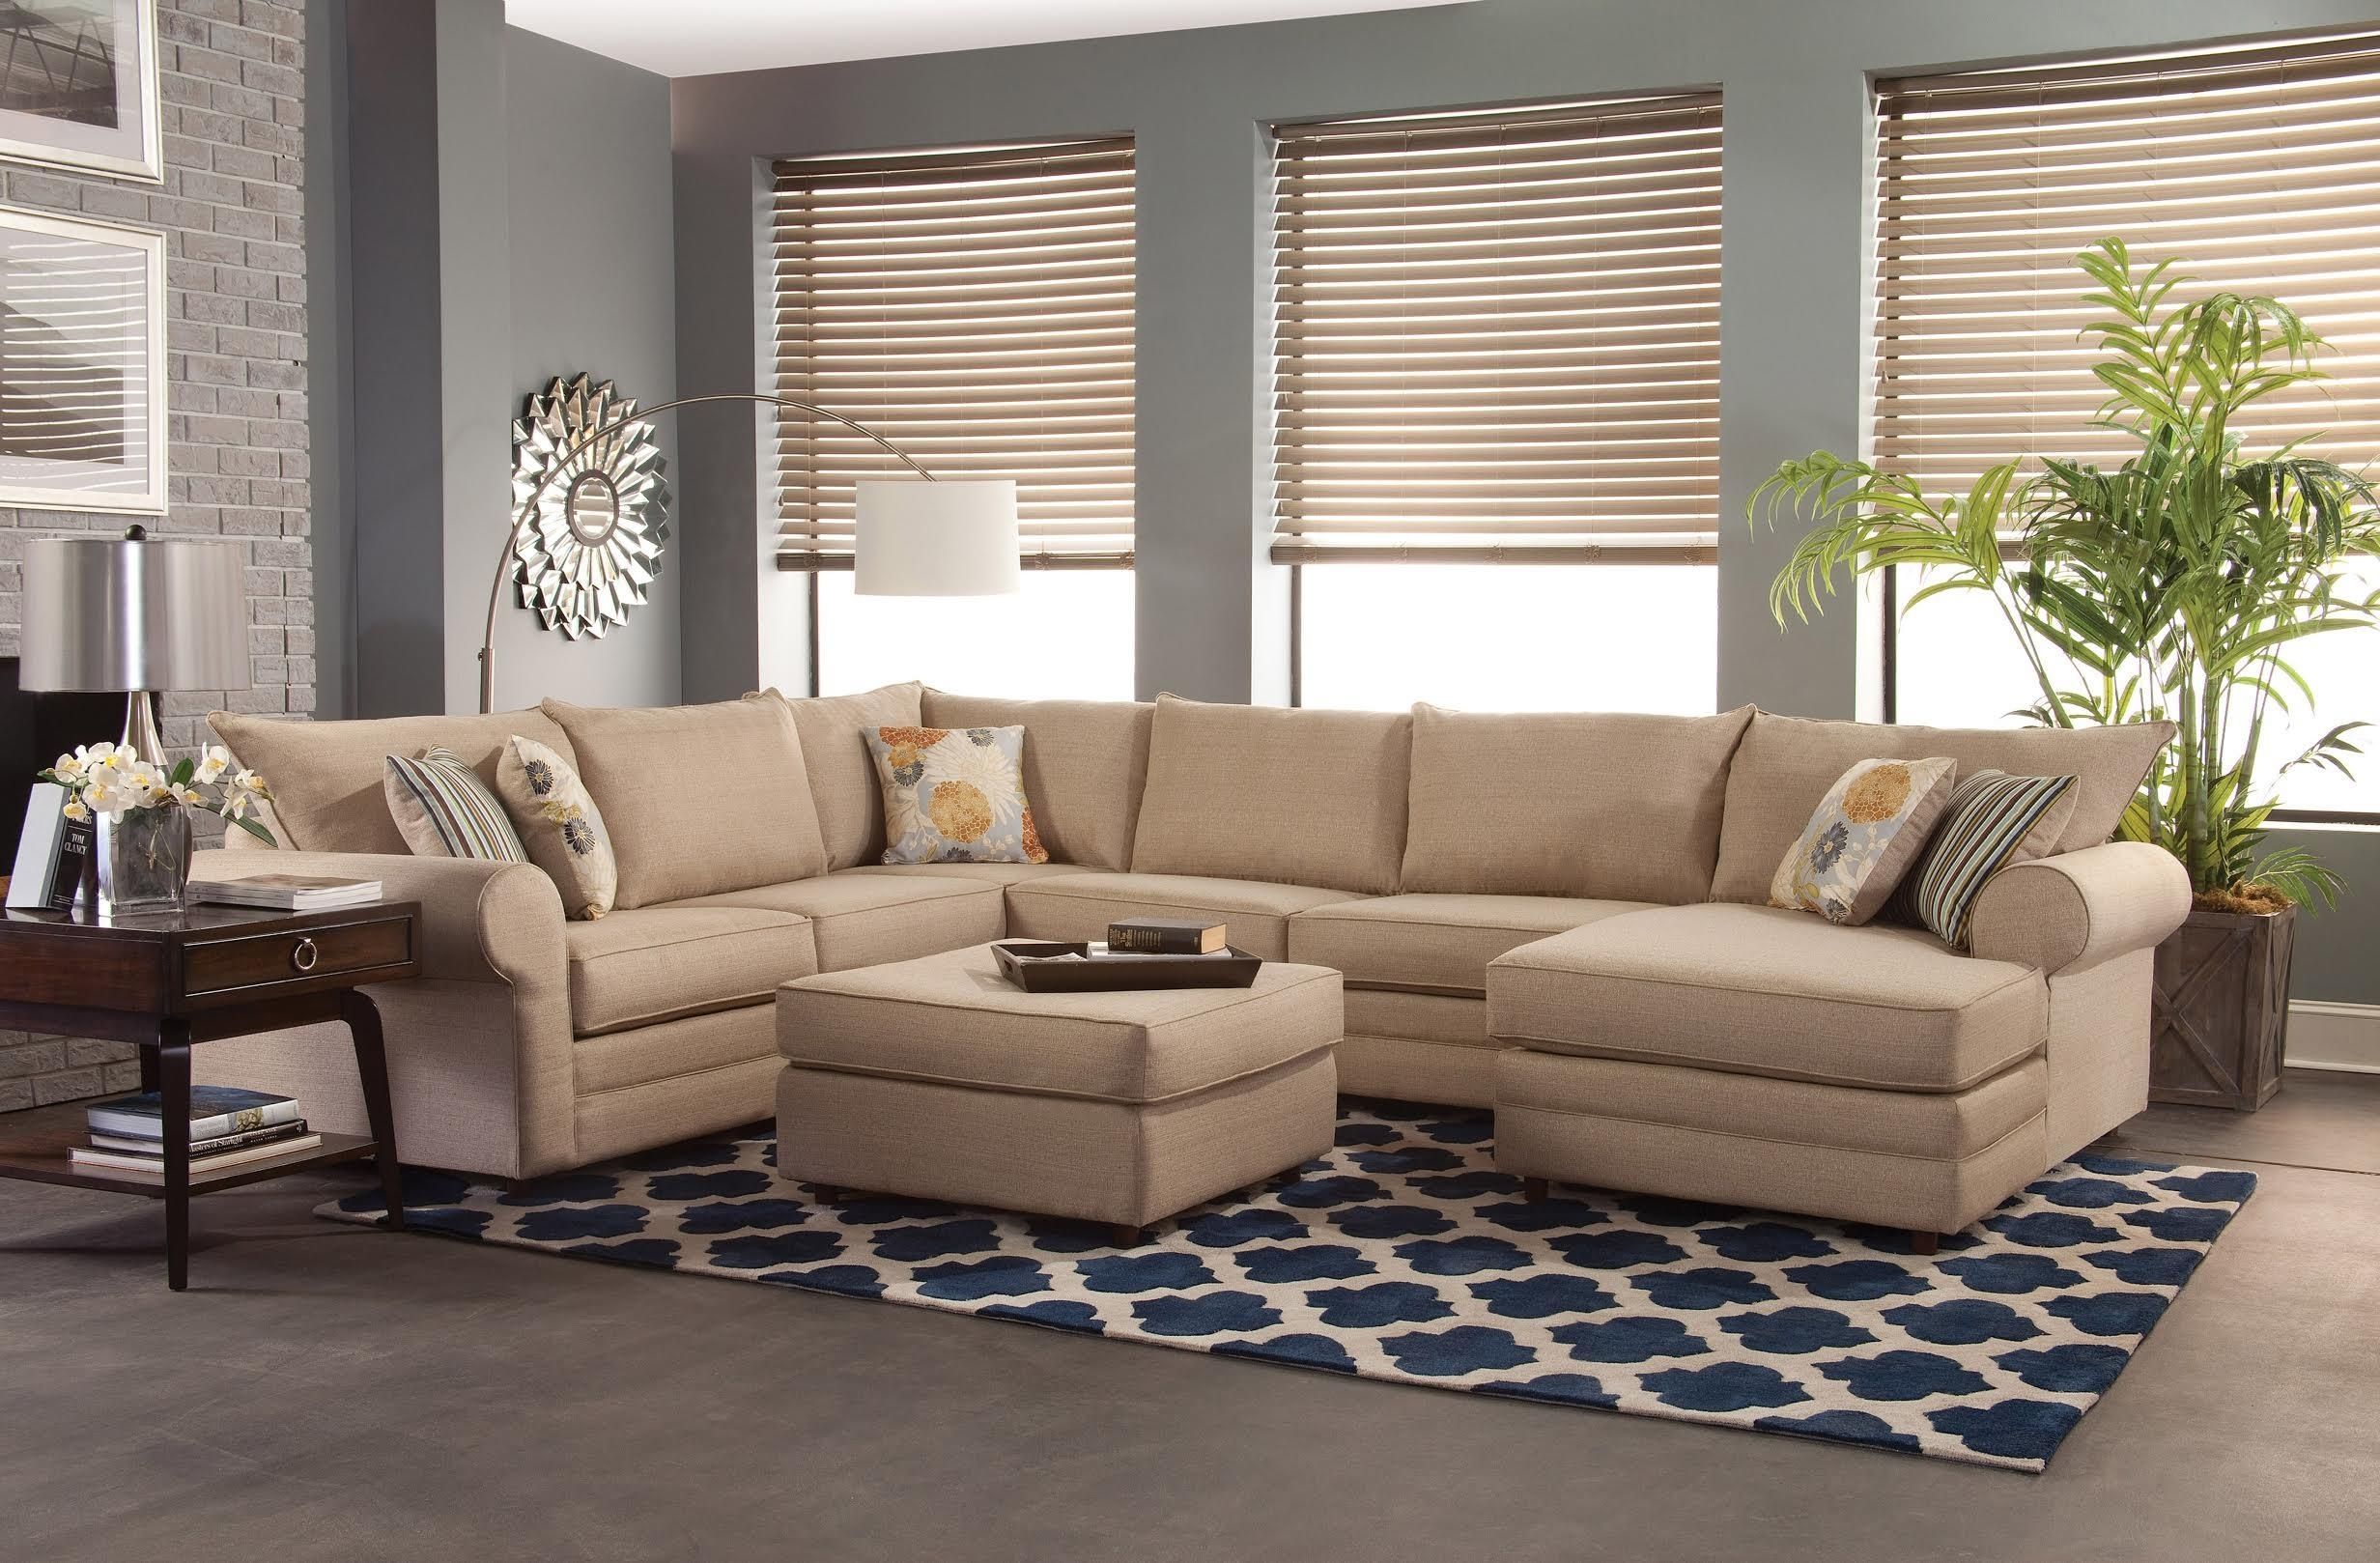 Belfort Essentials Monticello Casual Sectional Sofa | Belfort Throughout Sectional Sofas (Photo 6132 of 7825)